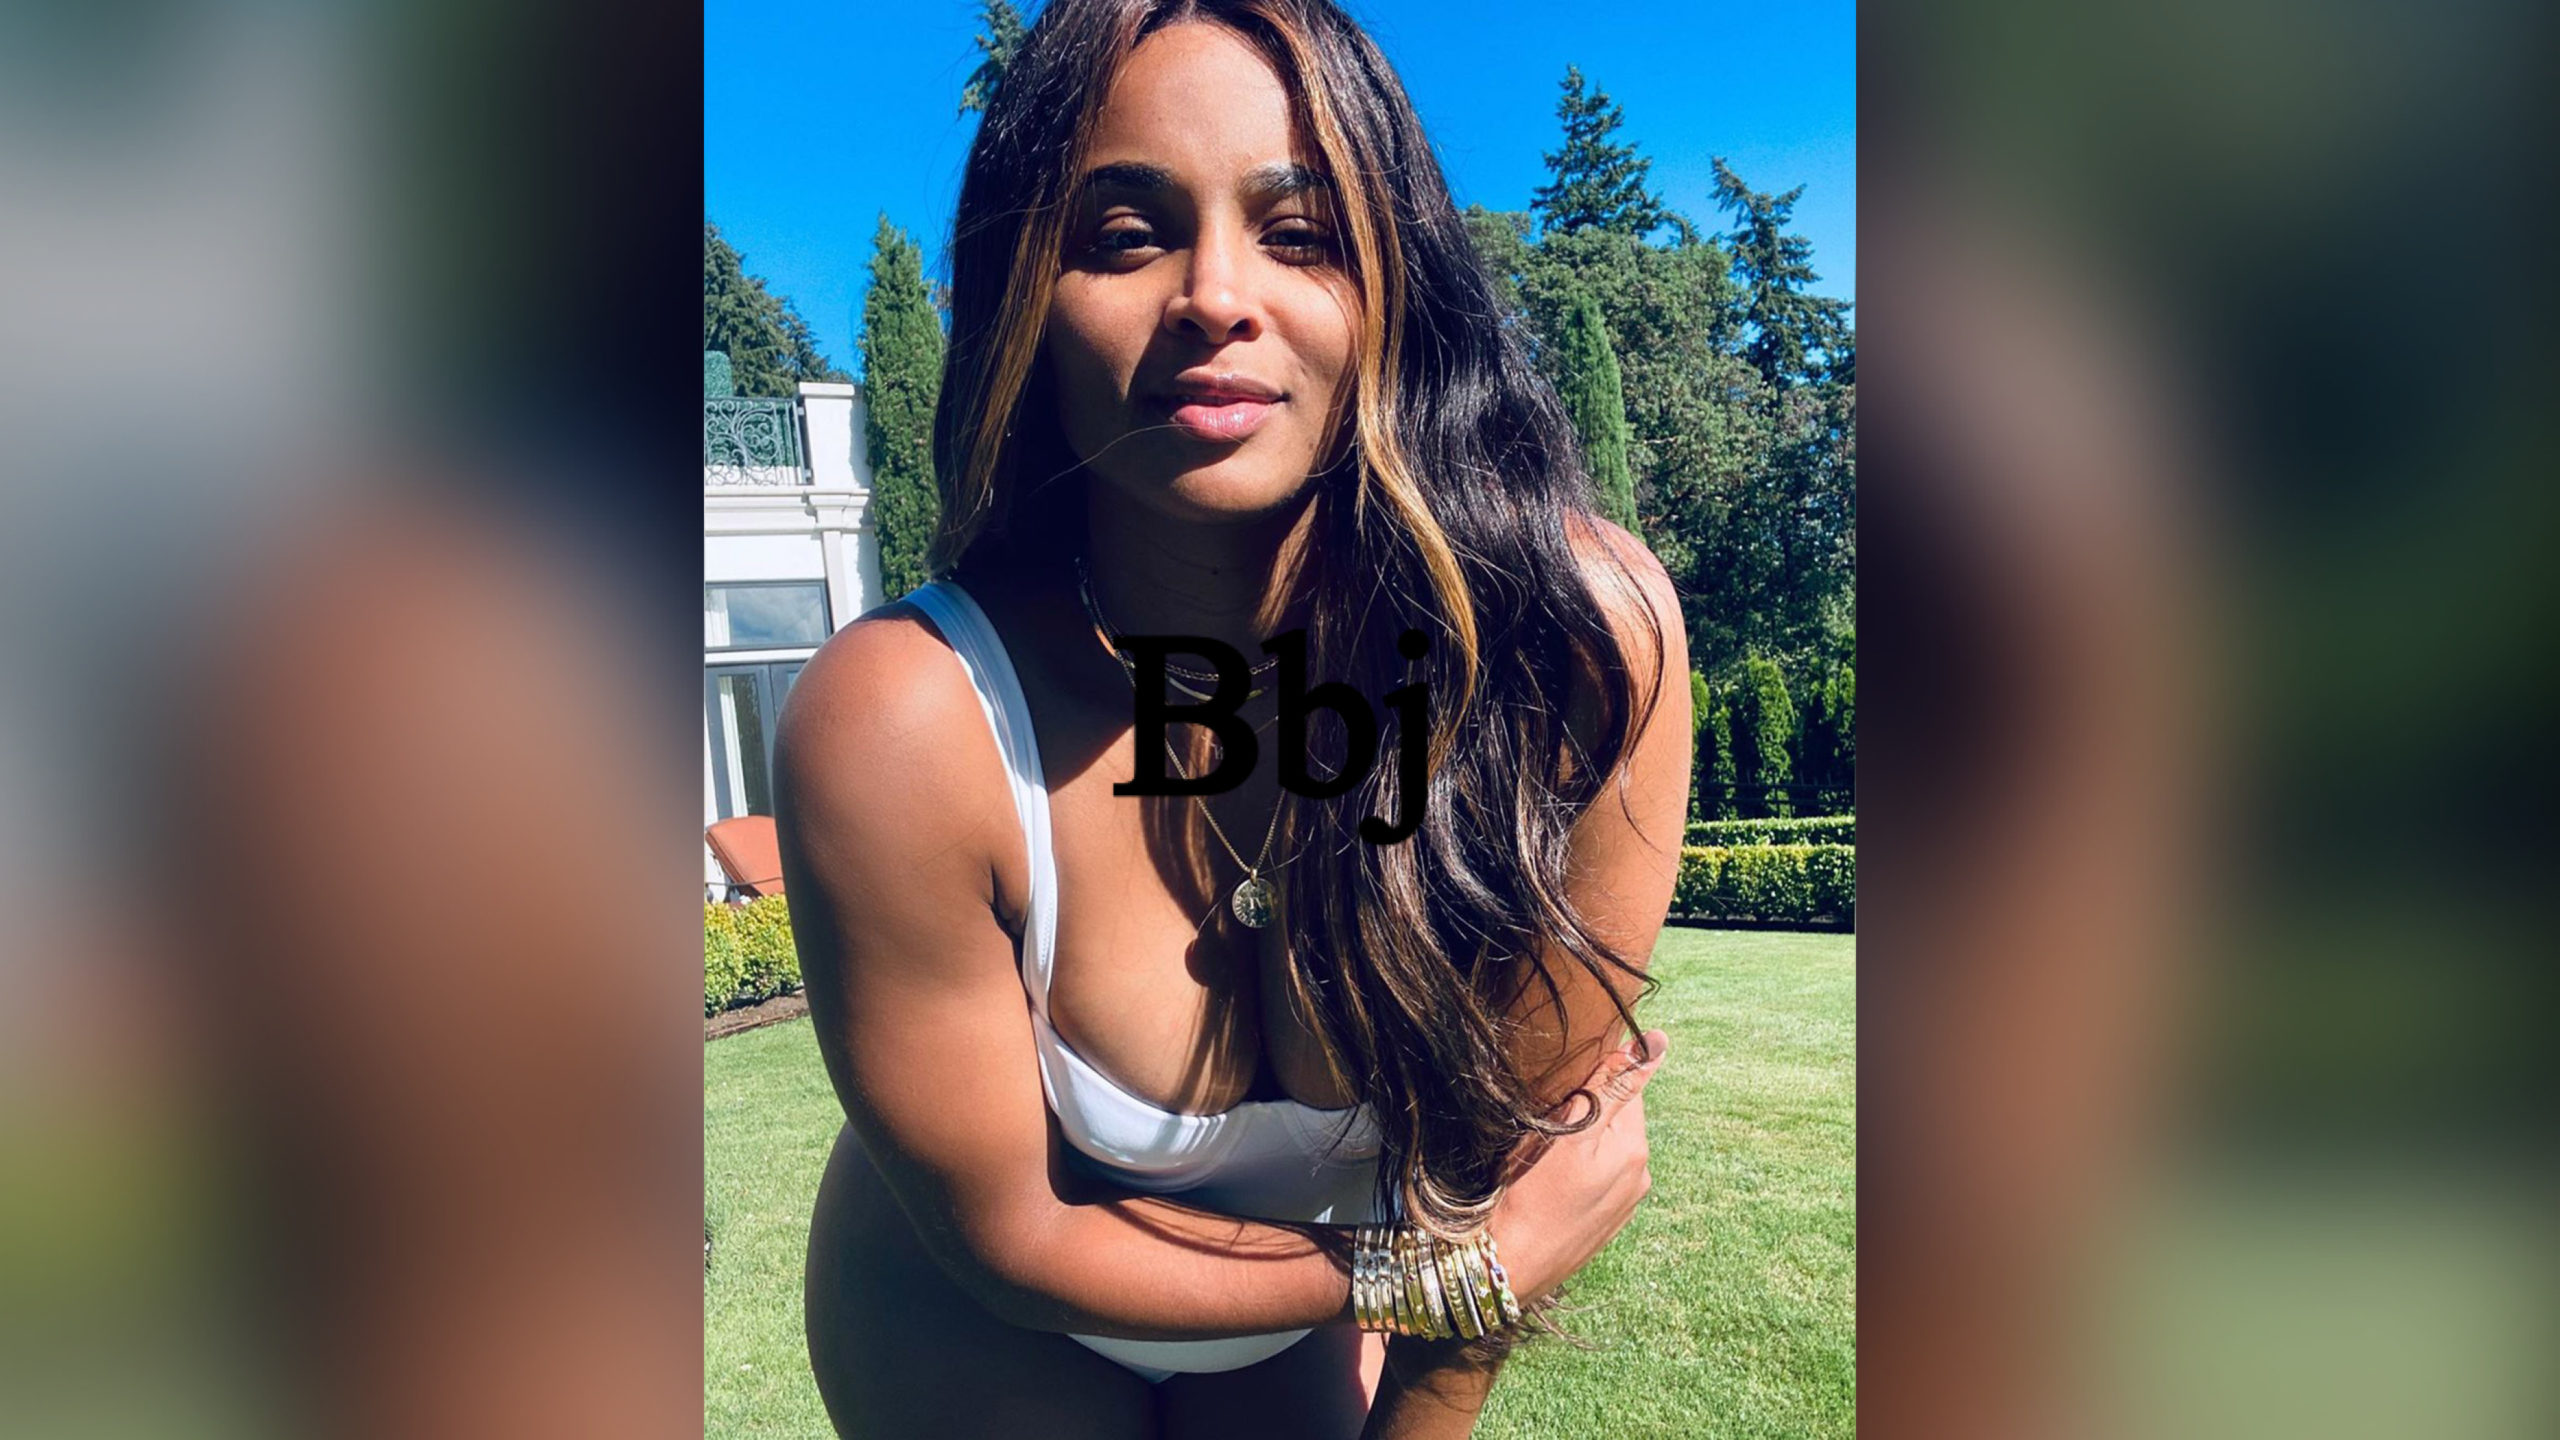 Ciara Stars New Fitness Journey To Lose 48 Pounds After Having Third Baby